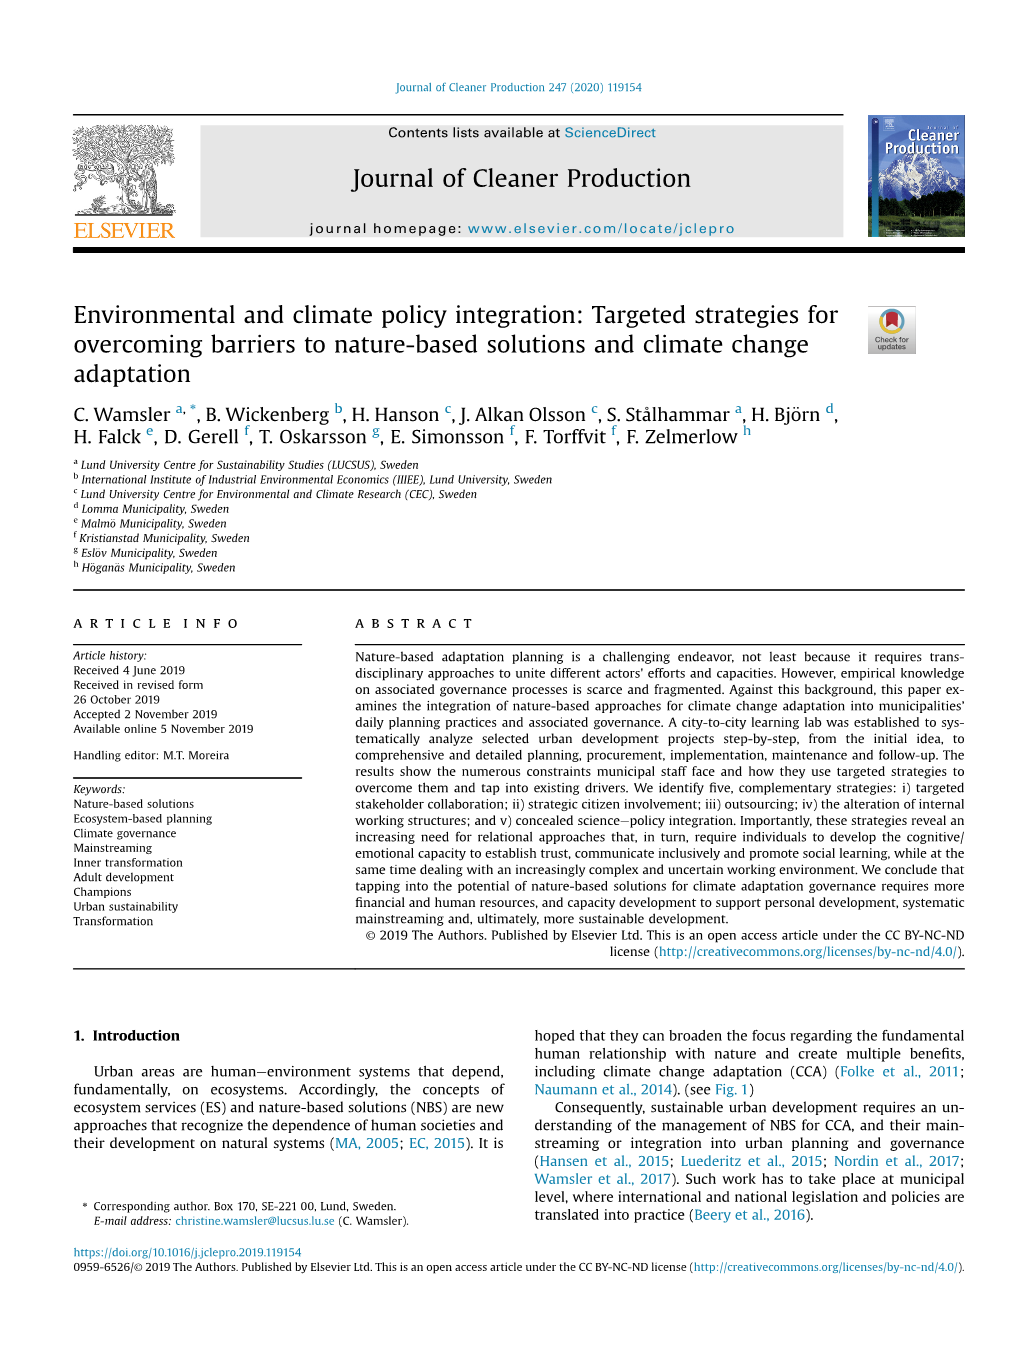 Environmental and Climate Policy Integration: Targeted Strategies for Overcoming Barriers to Nature-Based Solutions and Climate Change Adaptation